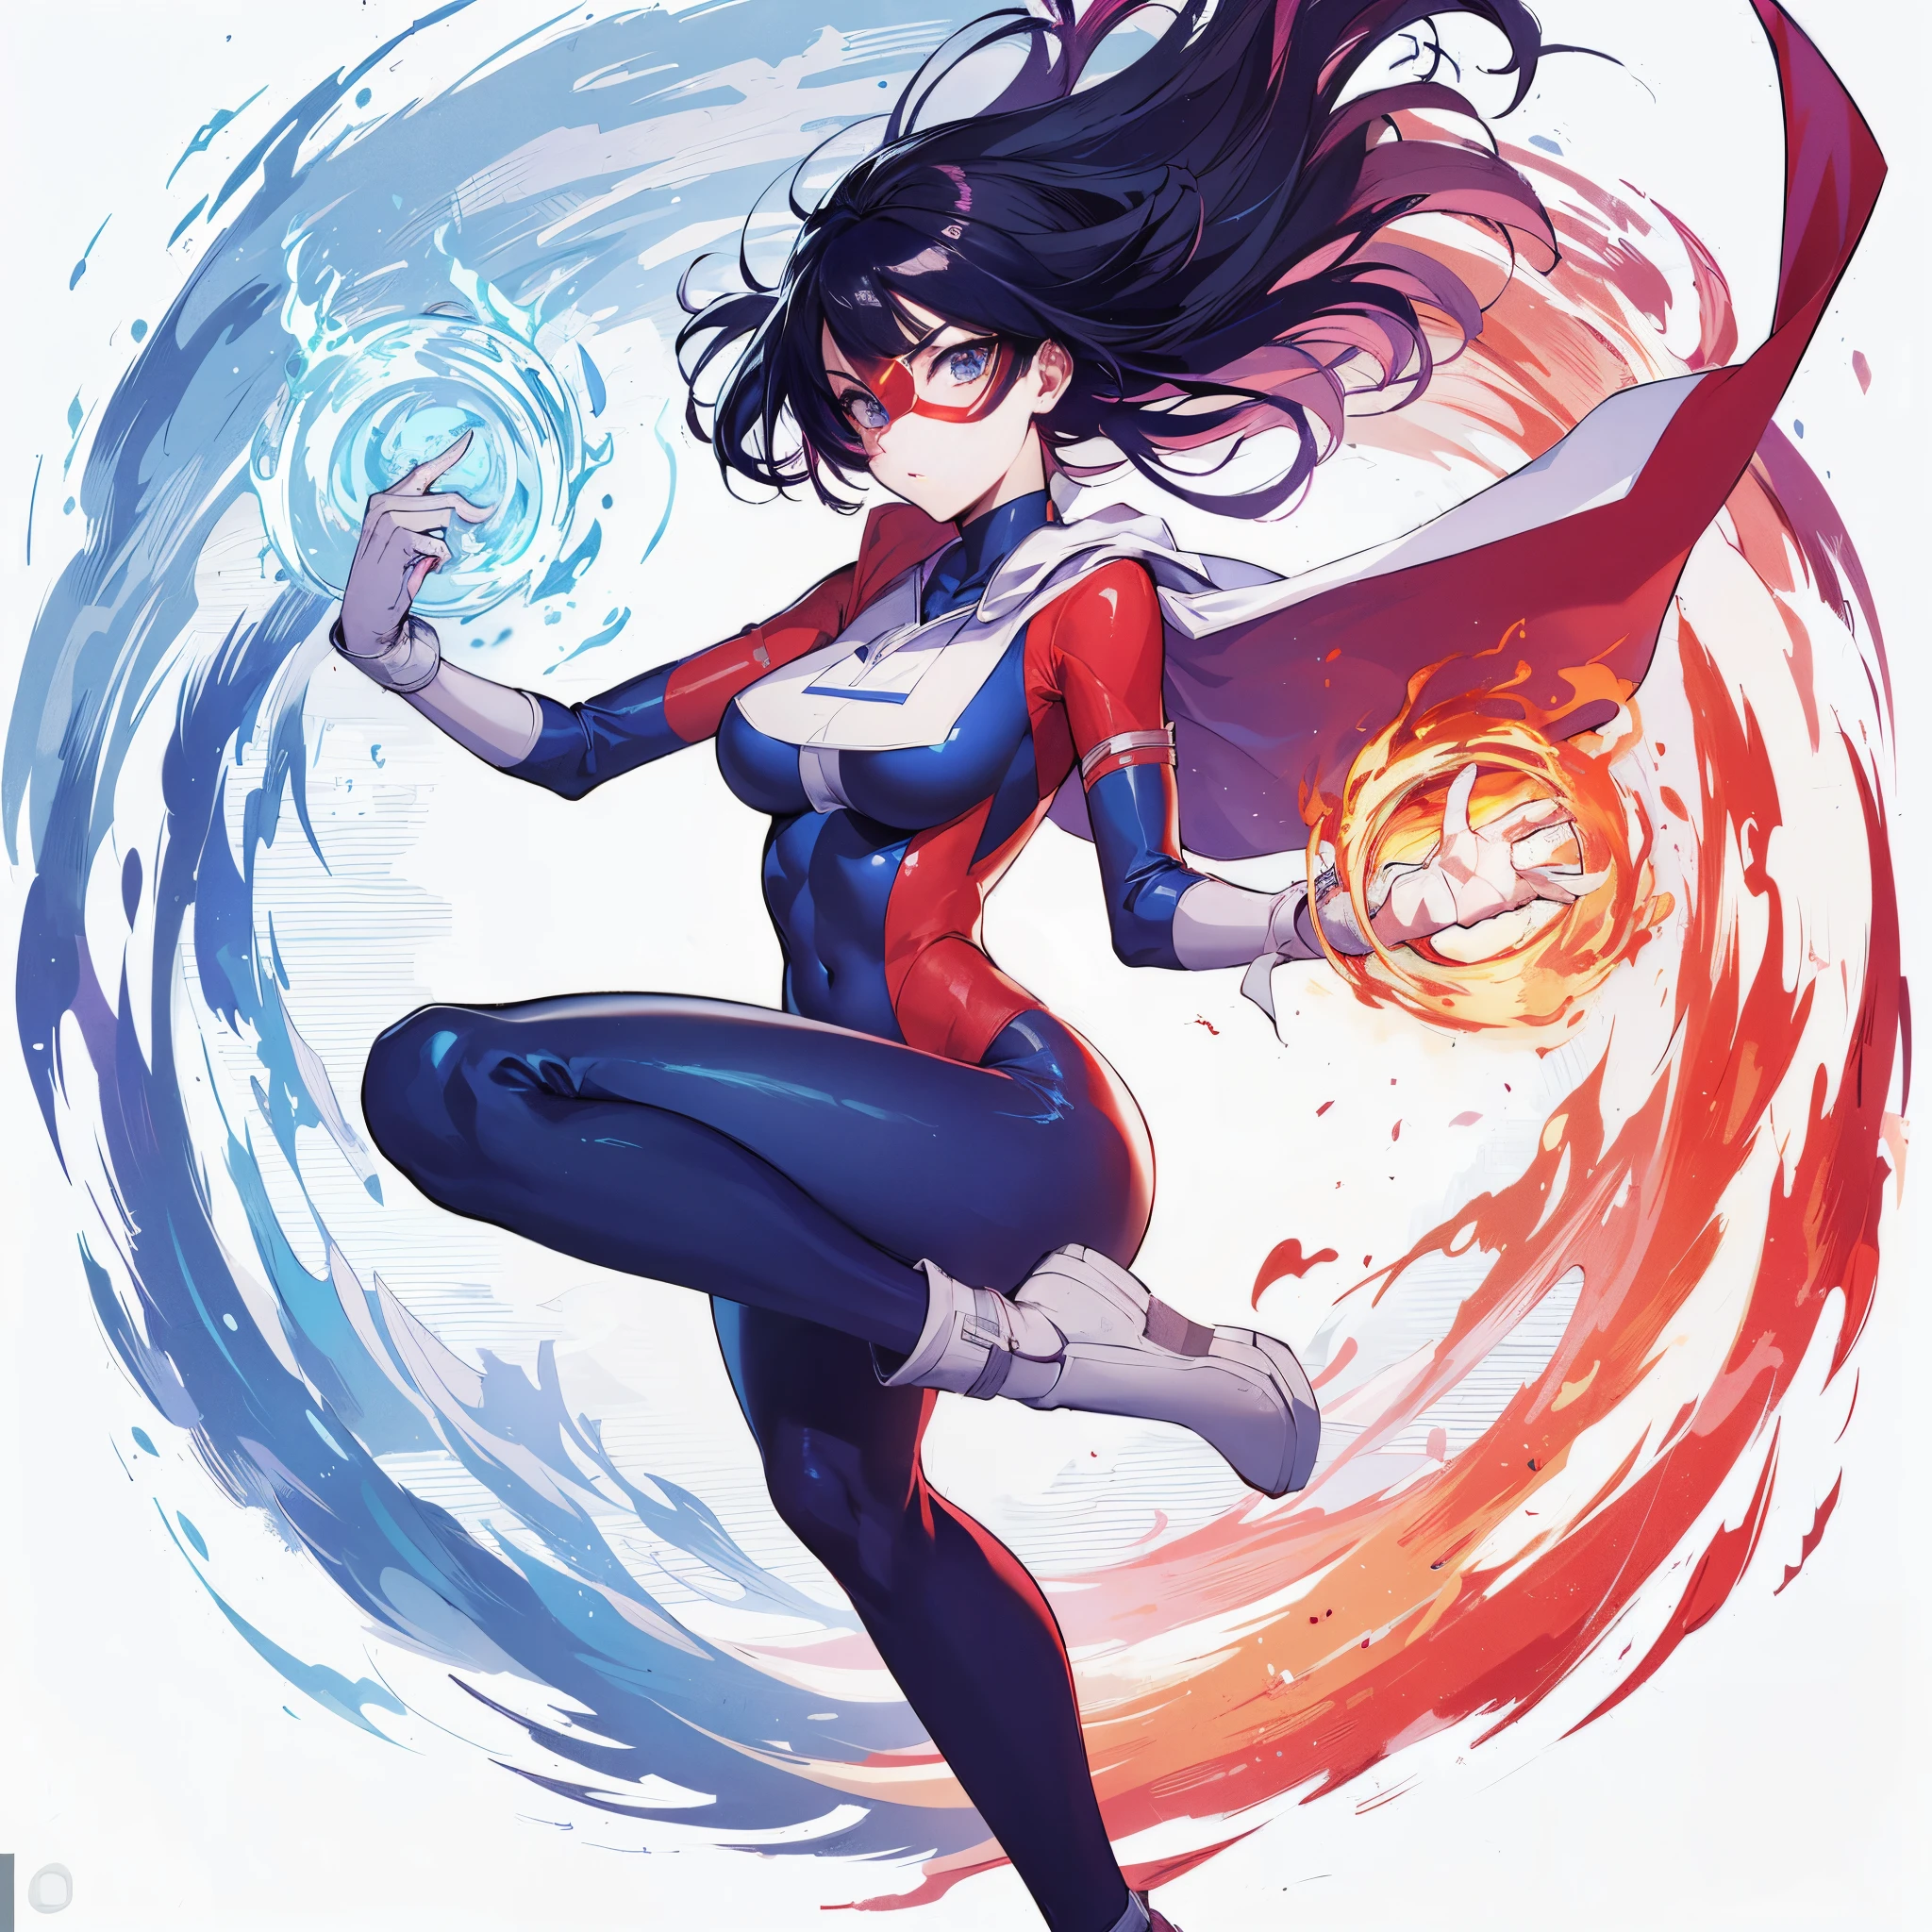 (masutepiece, of the highest quality), (Perfect athlete body: 1. 2), (Fine hair), Ultra Detail, Anime style, Full body, Solo, Superpowered high school girl heroine, hero domino mask, highleg leotard, Gloves and knee boots, image color: red and blue, Black and white hair, Flying Blue Sky, , Background: white , Full body, Energy pulse, ((Fire and ice in a woman&#39;s hands)) (spinning pose)